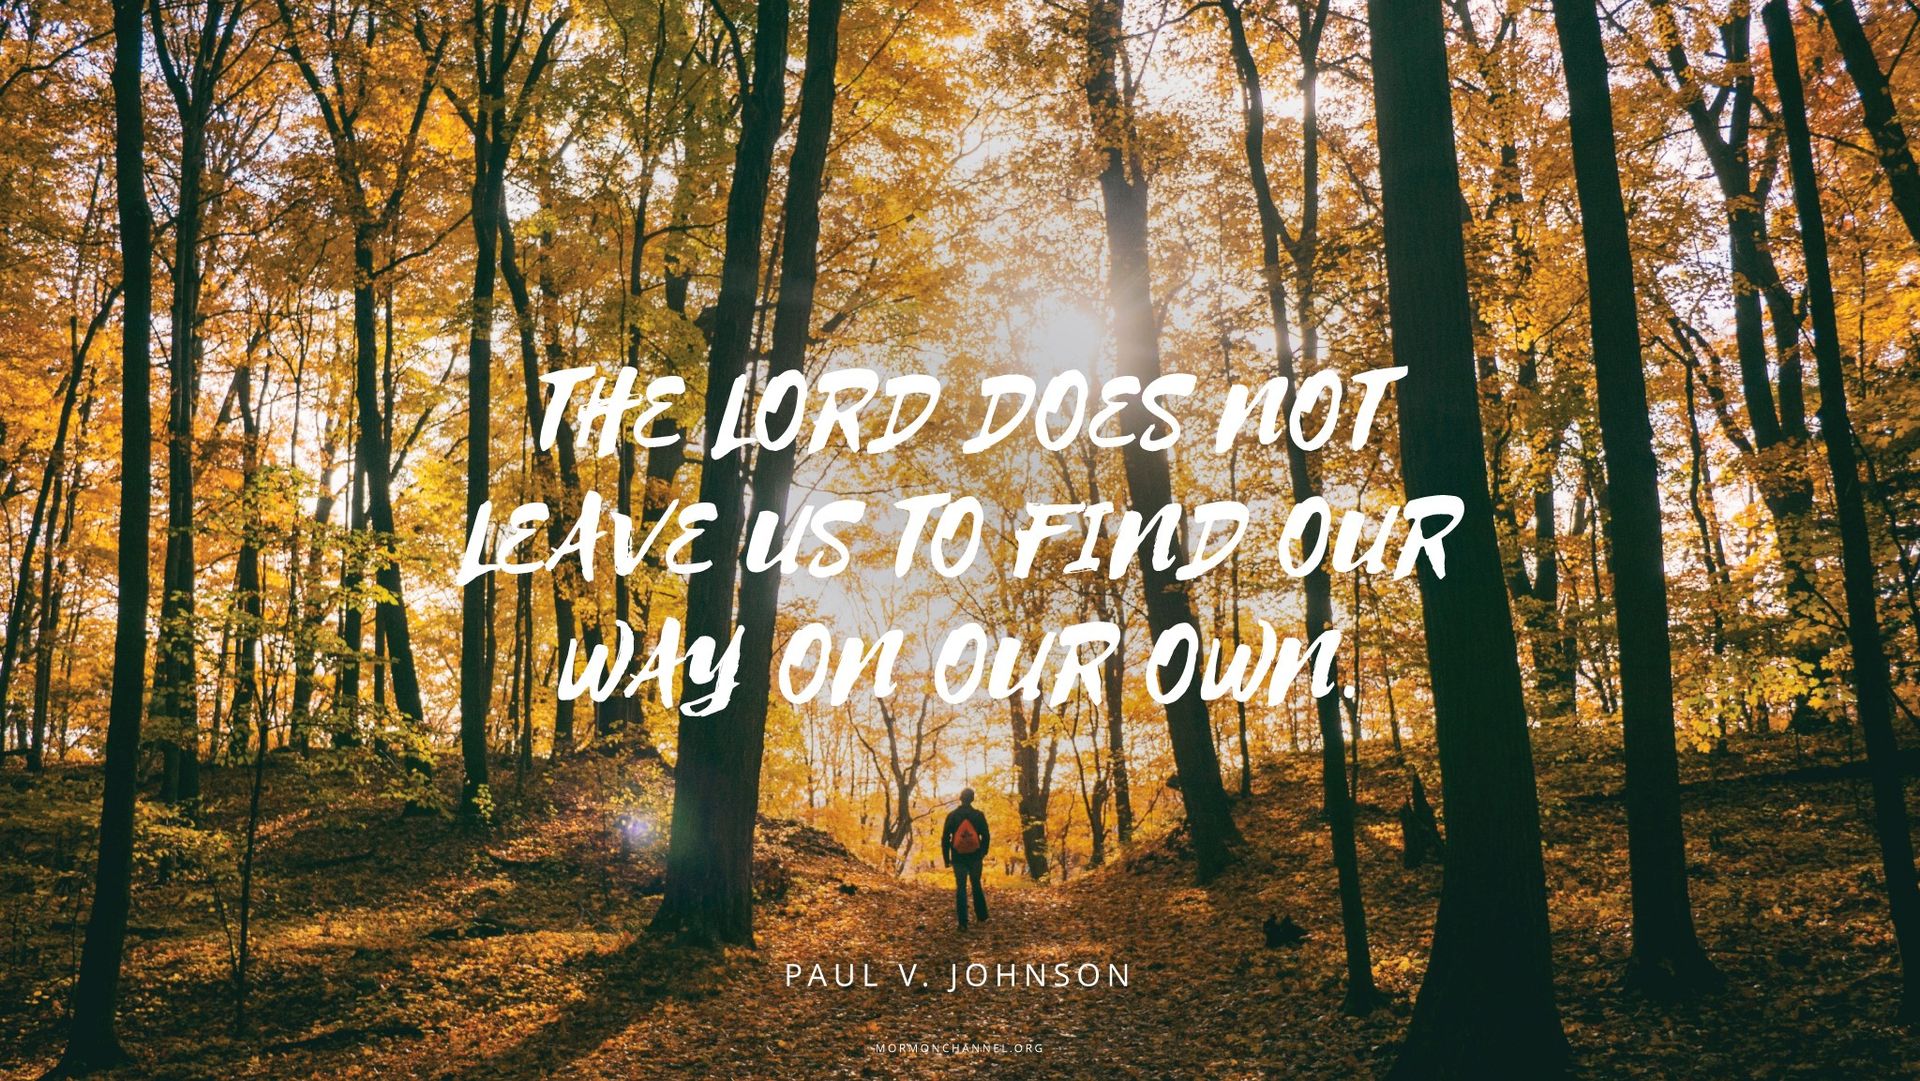 “The Lord does not leave us to find our way on our own.”—Elder Paul V. Johnson, “The Blessings of General Conference”